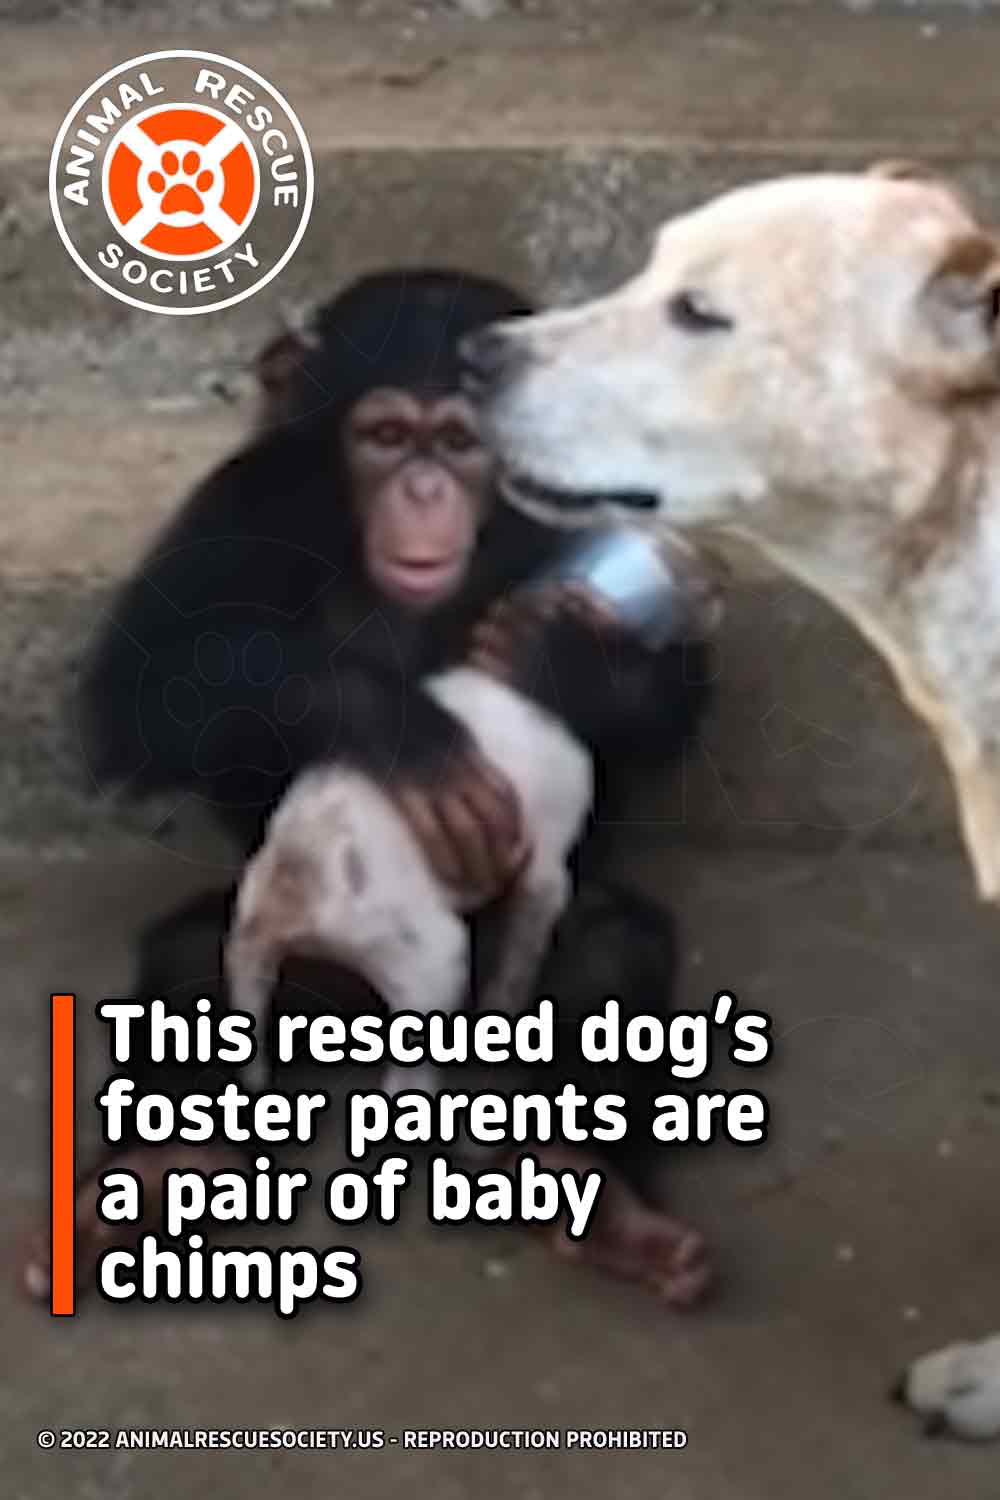 This rescued dog’s foster parents are a pair of baby chimps